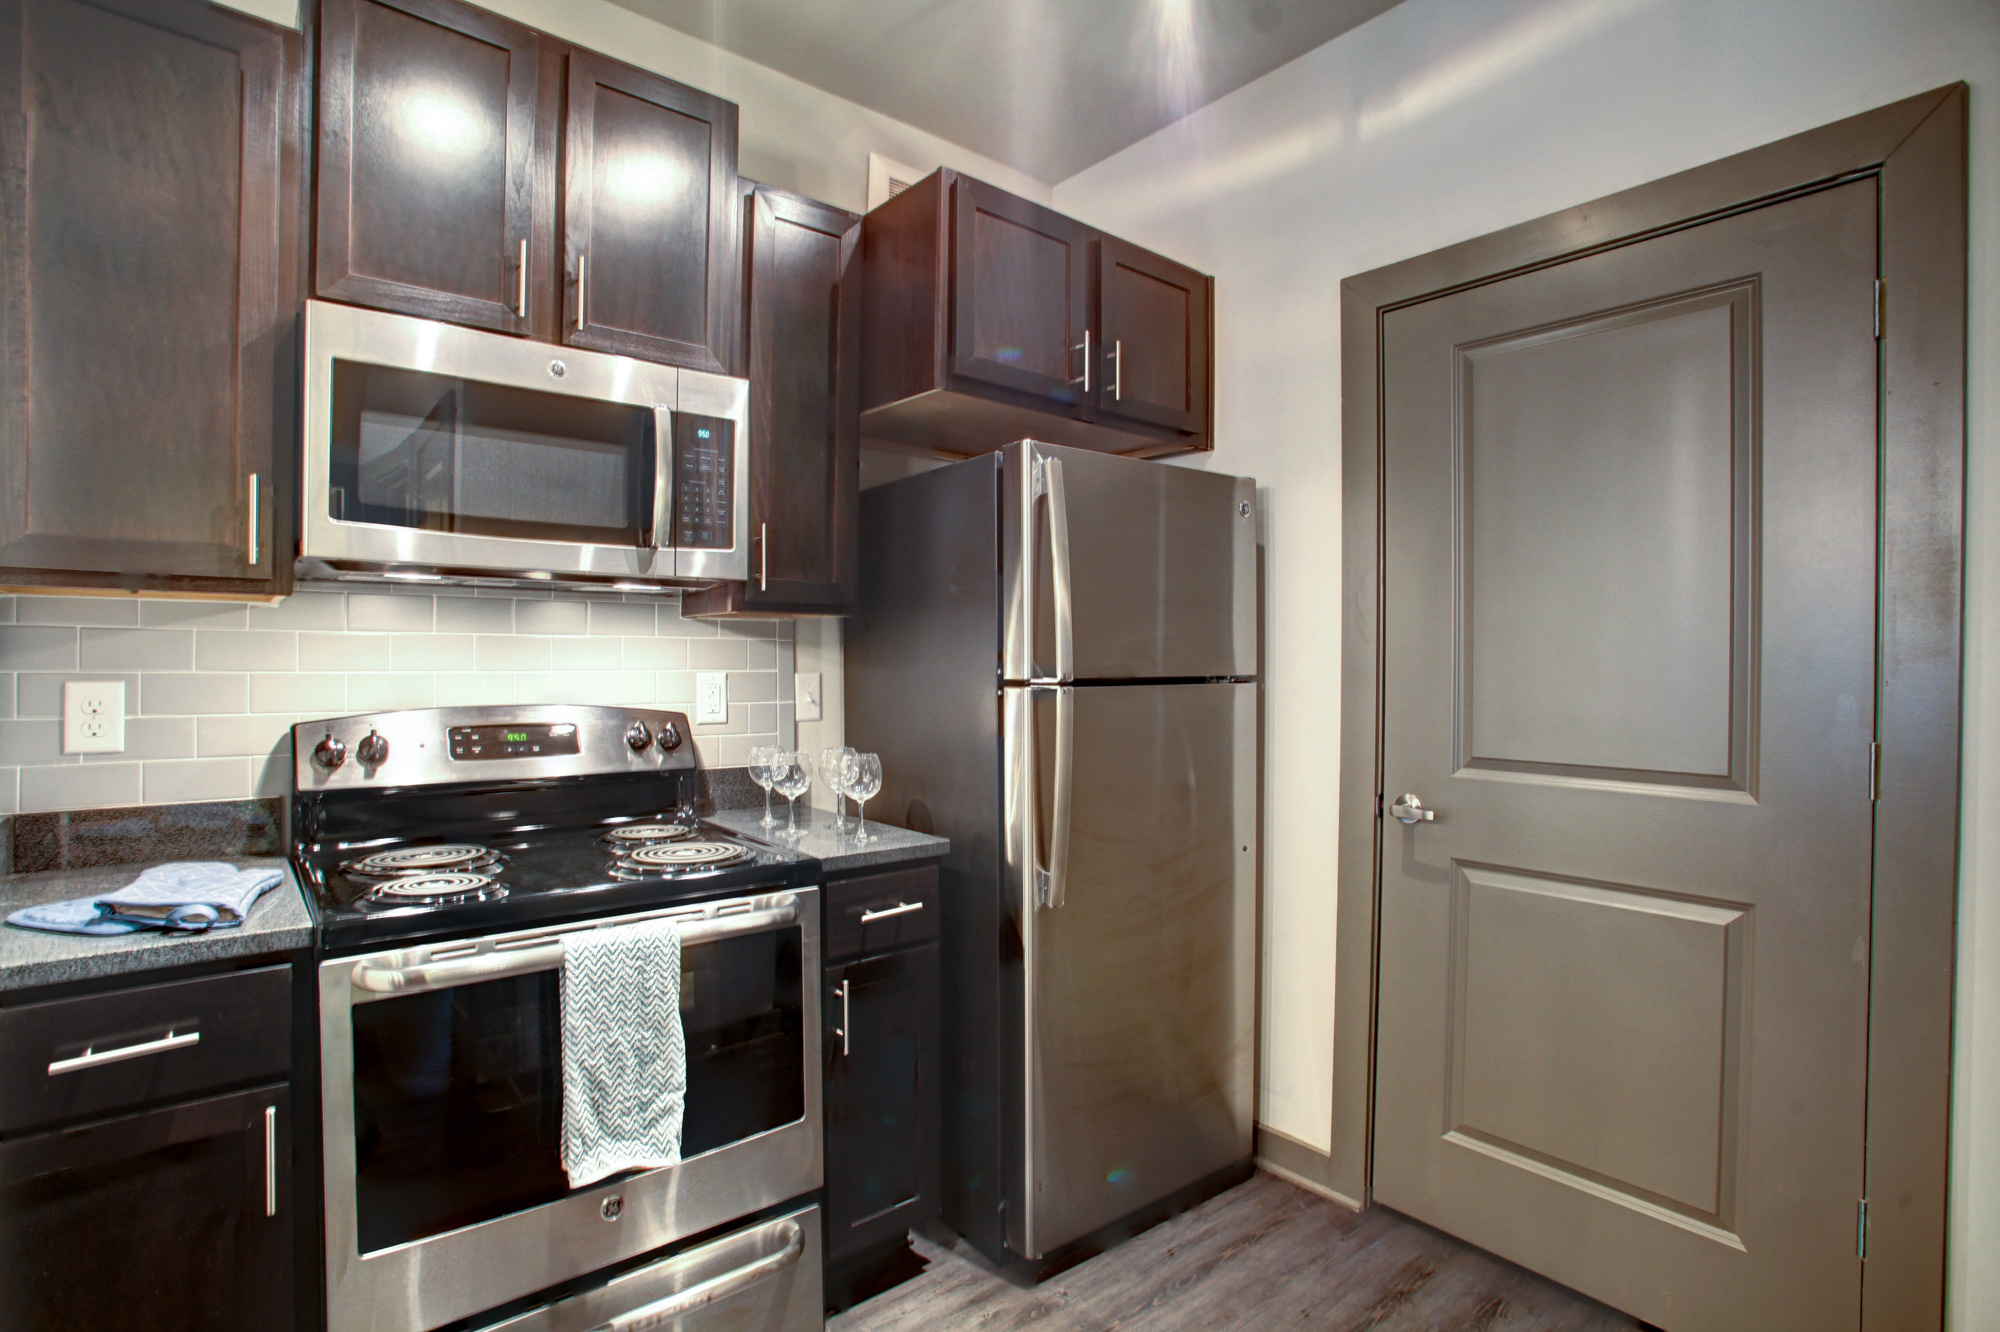 Espresso cabinetry with brushed nickel pulls and stainless steel appliances are in the kitchen at Park 9 apartments.